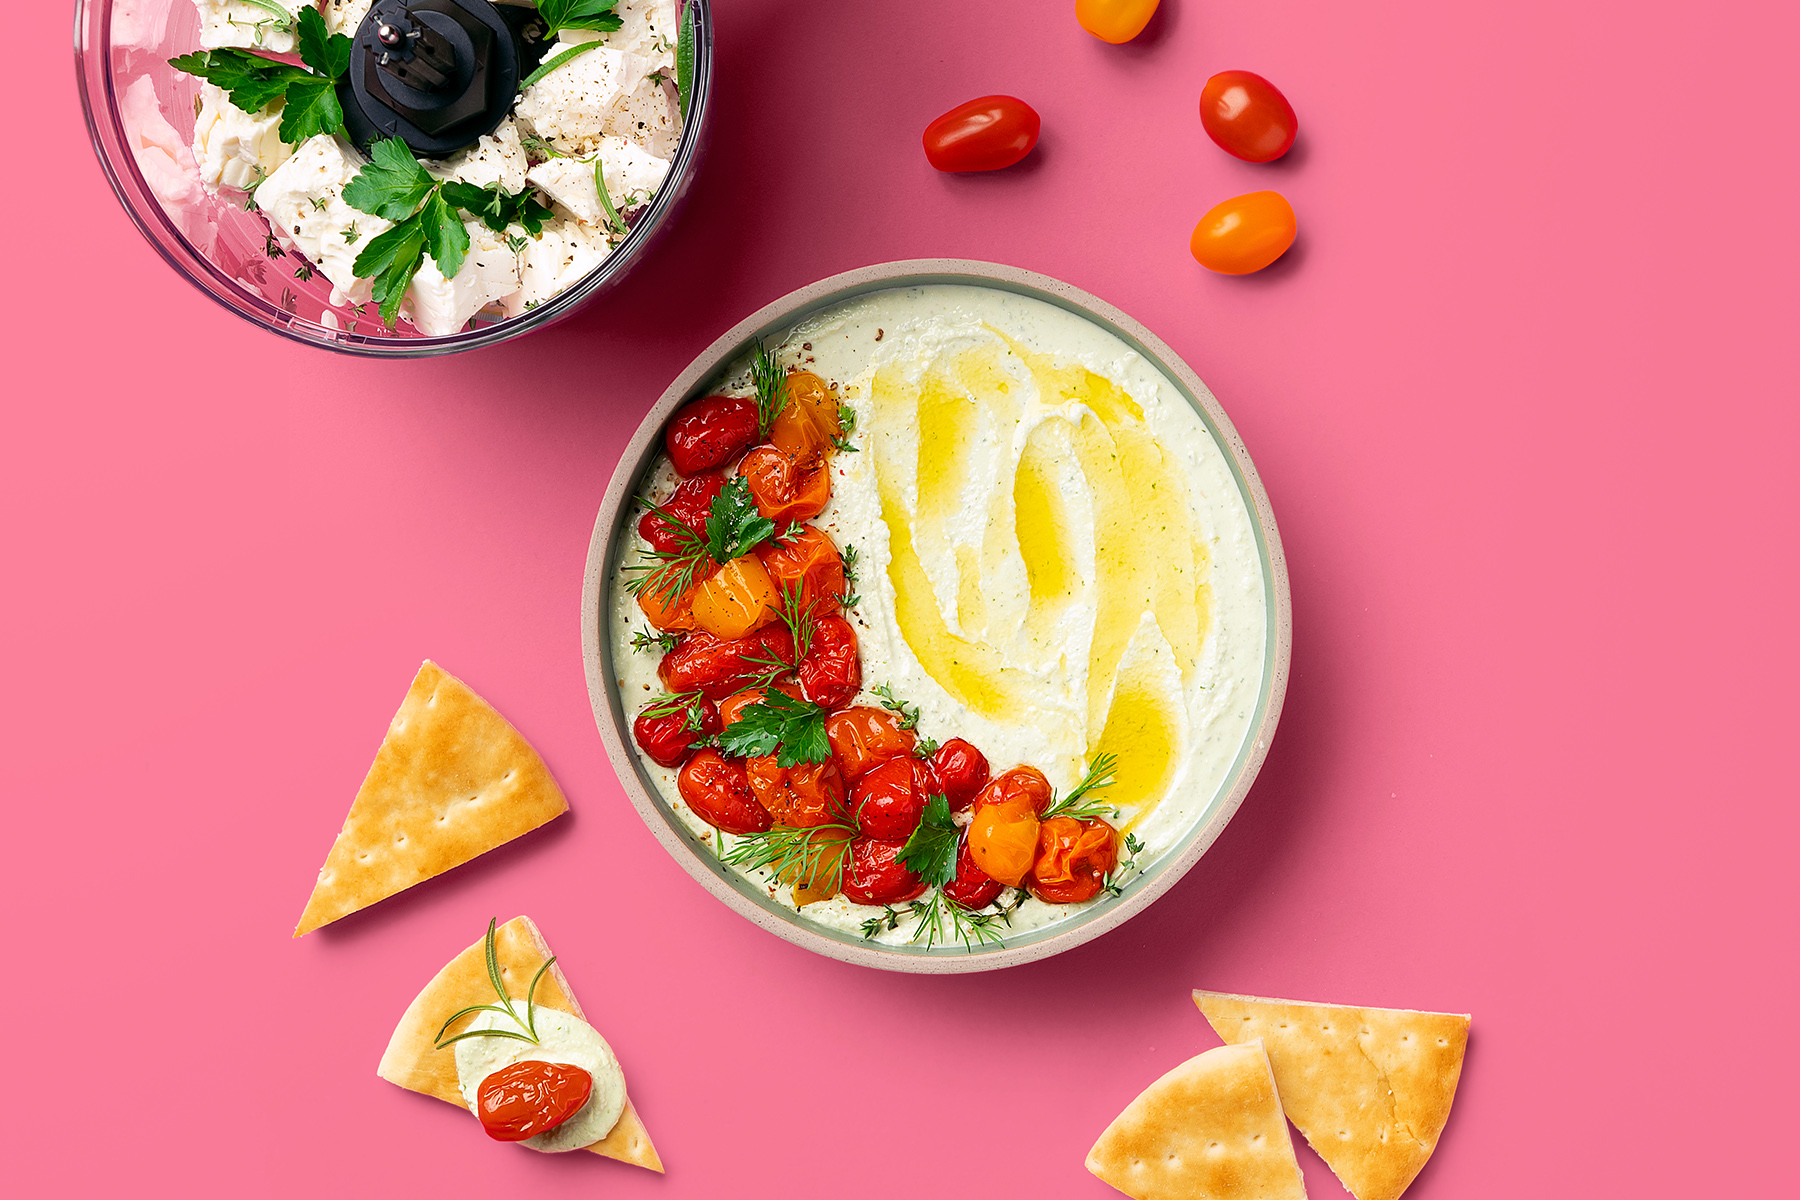 feta dip topped with sliced cherry tomatoes, olive oil, and herbs